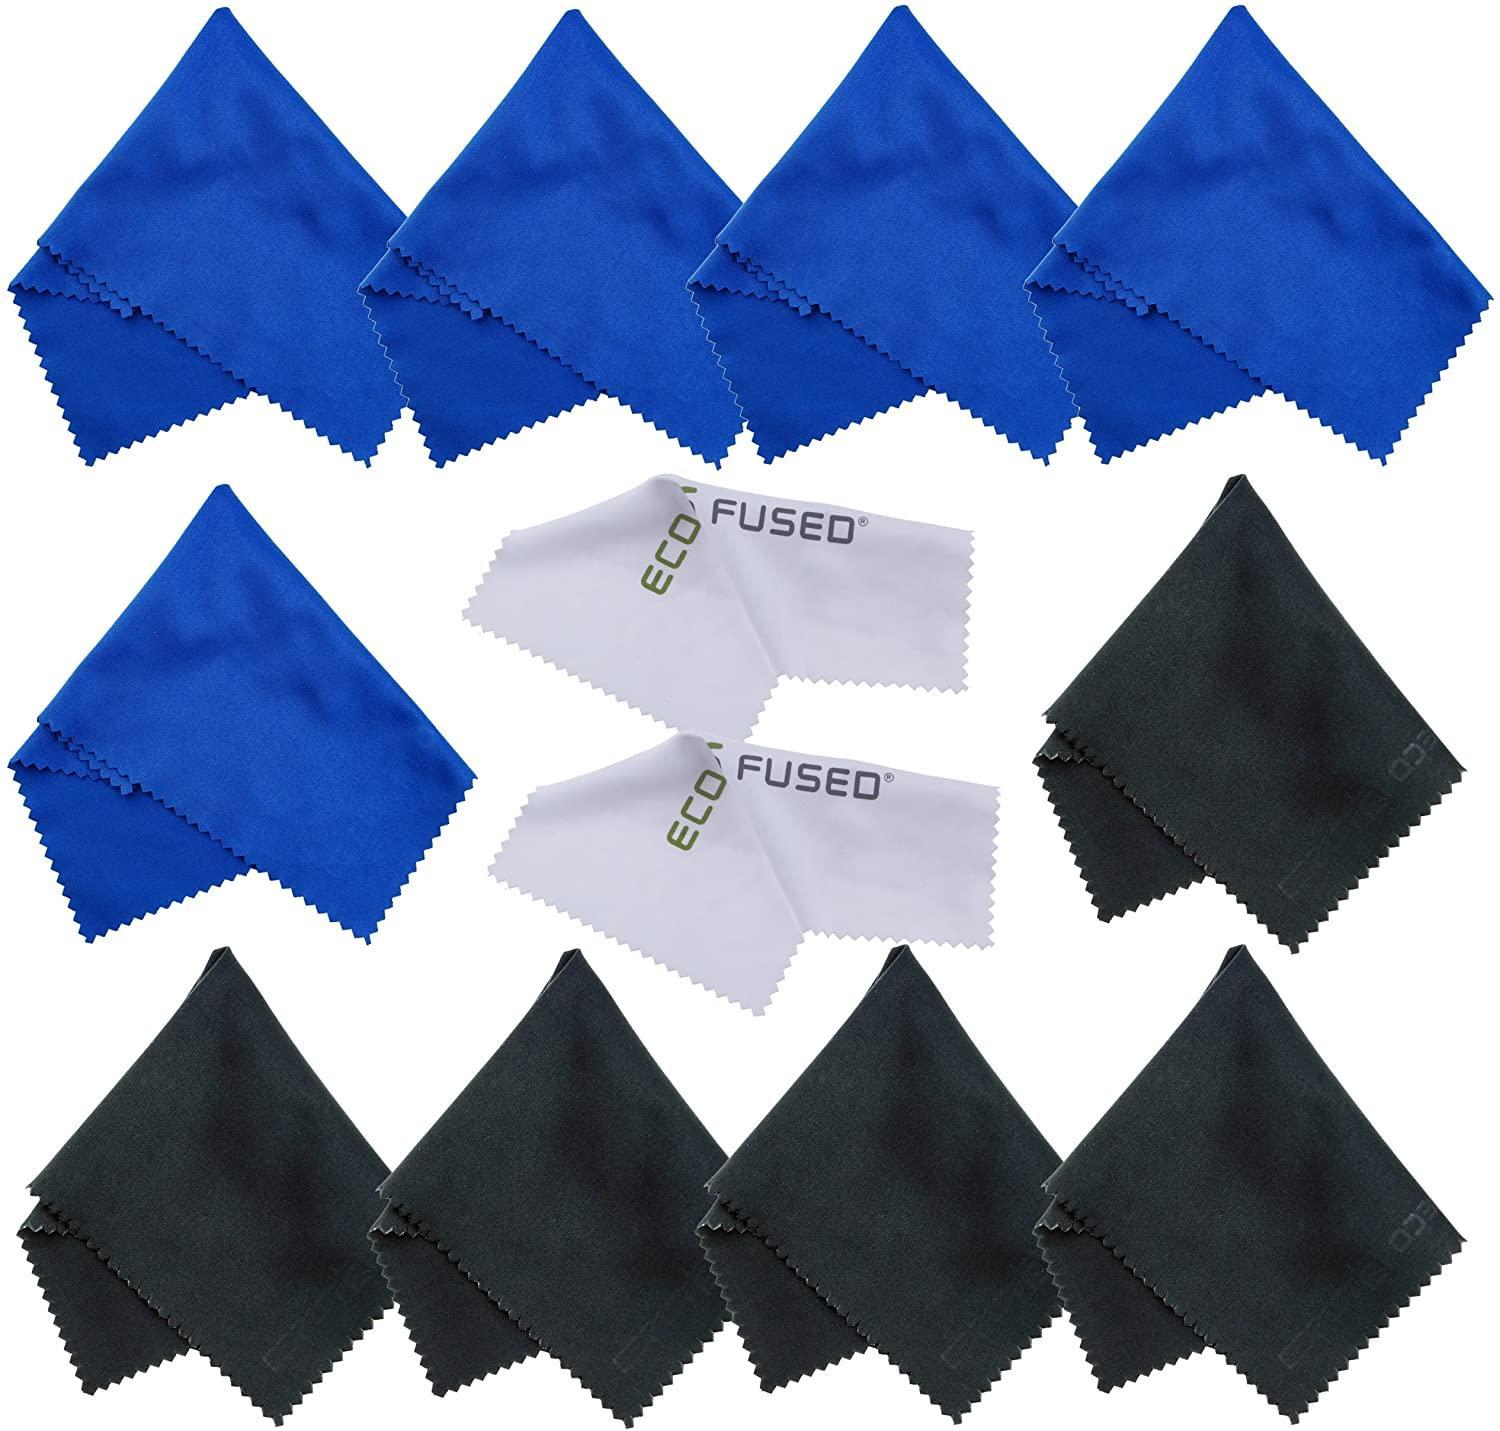 Microfiber Cleaning Cloths for Use with Cell Phone, Tablets, Laptops, Glasses, Lenses and Other Delicate Surfaces 12 Pack 5 Blue + 5 Black